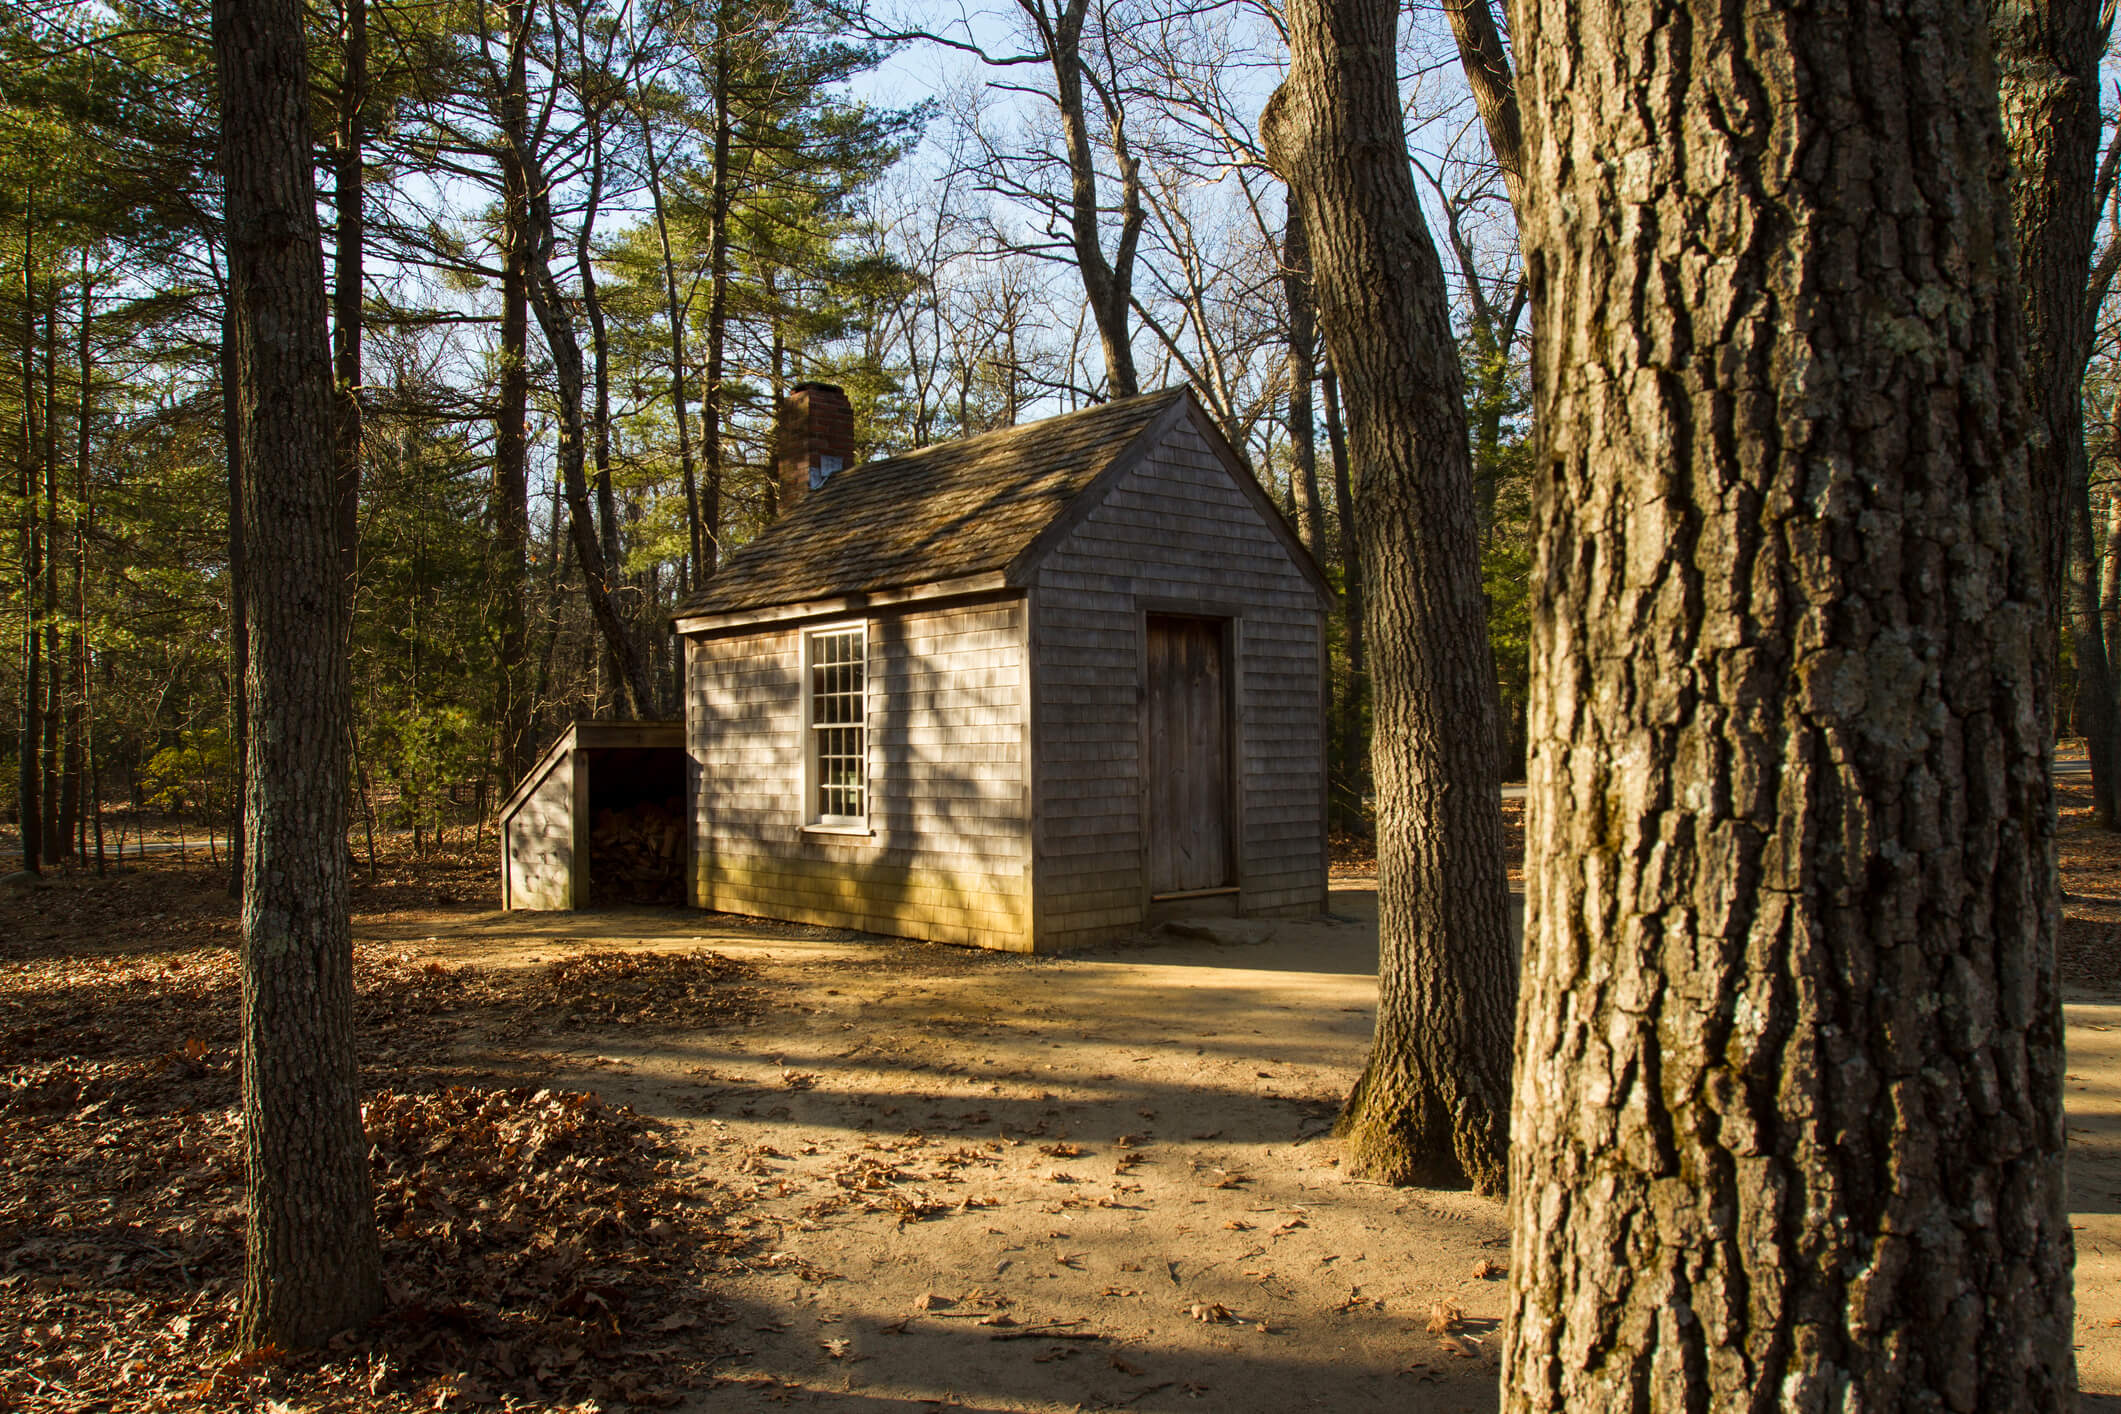 Recreation of Thoreau's Cabin at Walden Pond in Massachusetts (Nick Pederson/Getty Images)